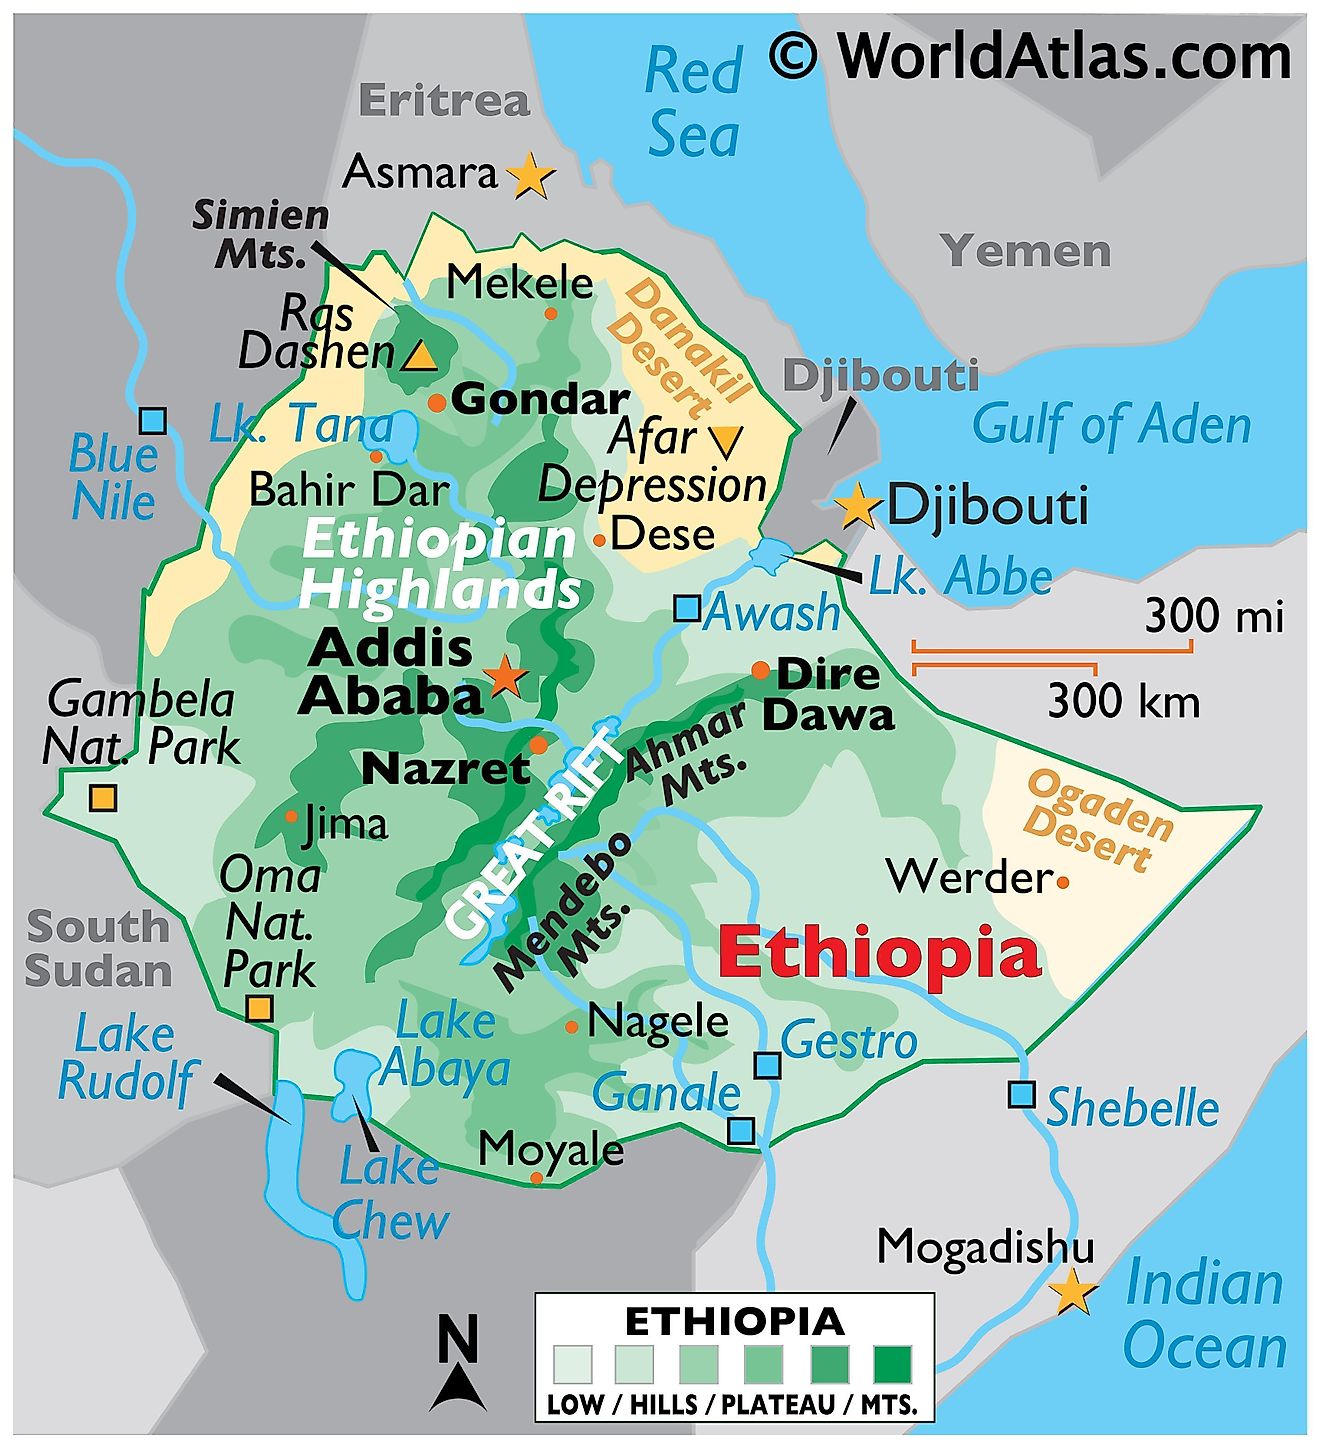 Physical Map of Ethiopia with state boundaries, relief, extreme points, major lakes and rivers, and important cities.